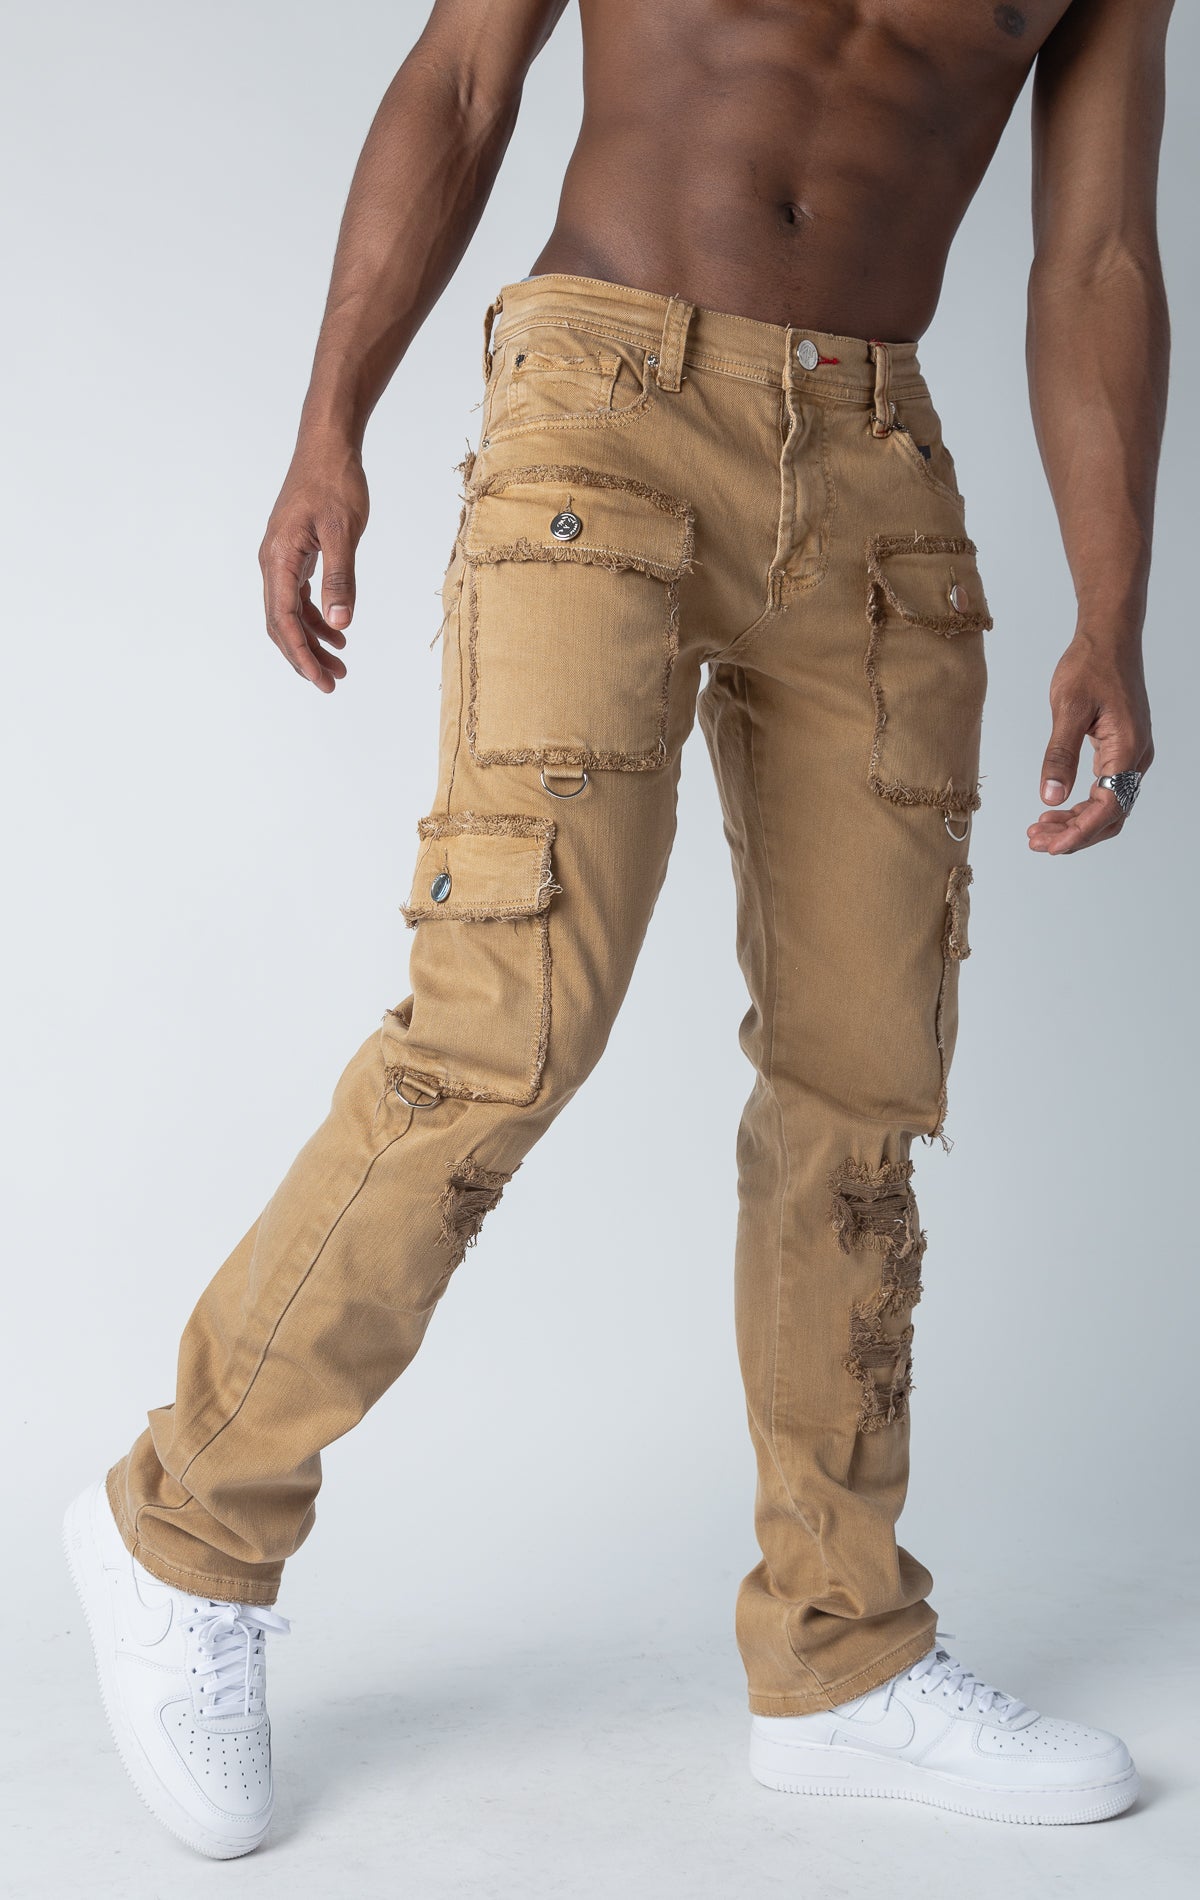 Slim fit, stretch denim cargo jeans with multiple pockets, distressed detailing at the edges, and reinforced stitching.